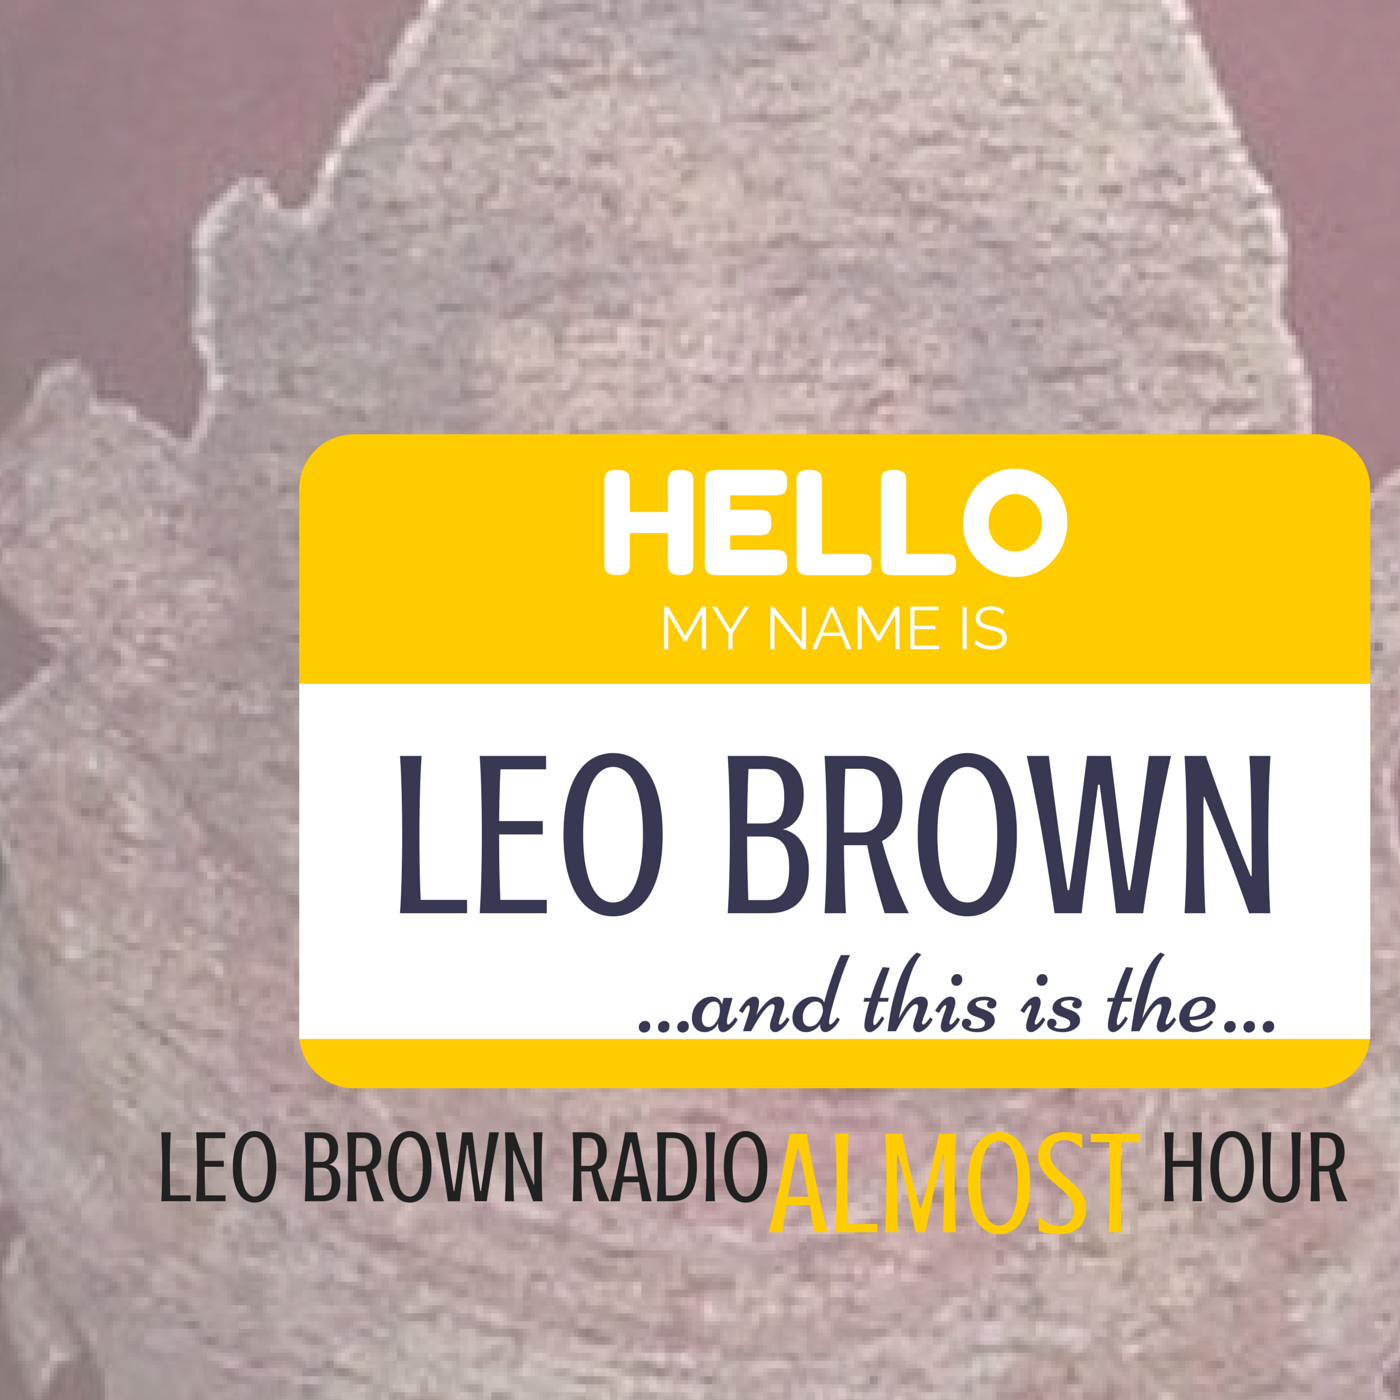 Leo Brown Almost Hour 02/10/17